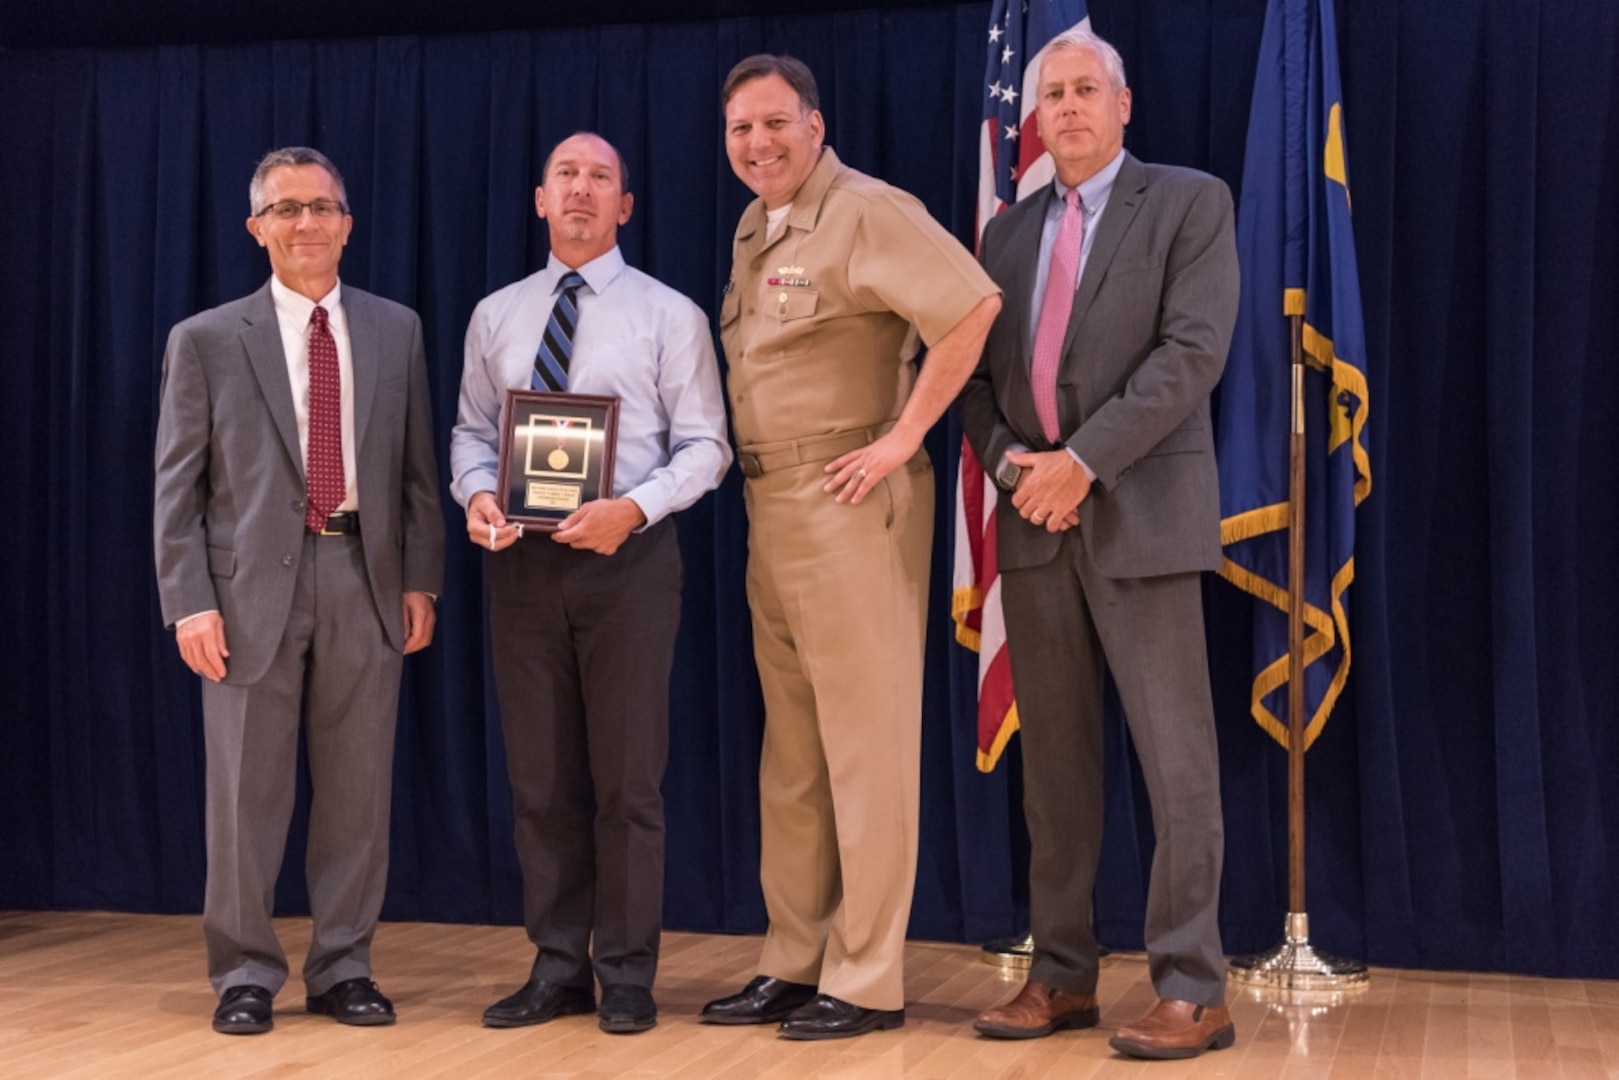 Lawrence Michelon, a senior electronics engineer for the Systems Design and Integration Branch at Carderock™s Combatant Craft Division in Norfolk, receives the Rear Adm. George W. Melville Award for engineering excellence at the Naval Surface Warfare Center, Carderock Division Honor Awards ceremony Aug. 1, 2017, in West Bethesda, Md. From left to right: Technical Director Dr. Tim Arcano, Michelon, Commanding Officer Capt. Mark Vandroff and Naval Architecture and Engineering Department Head Mike Brown. (U.S. Navy photo by Jake Cirksena/Released)